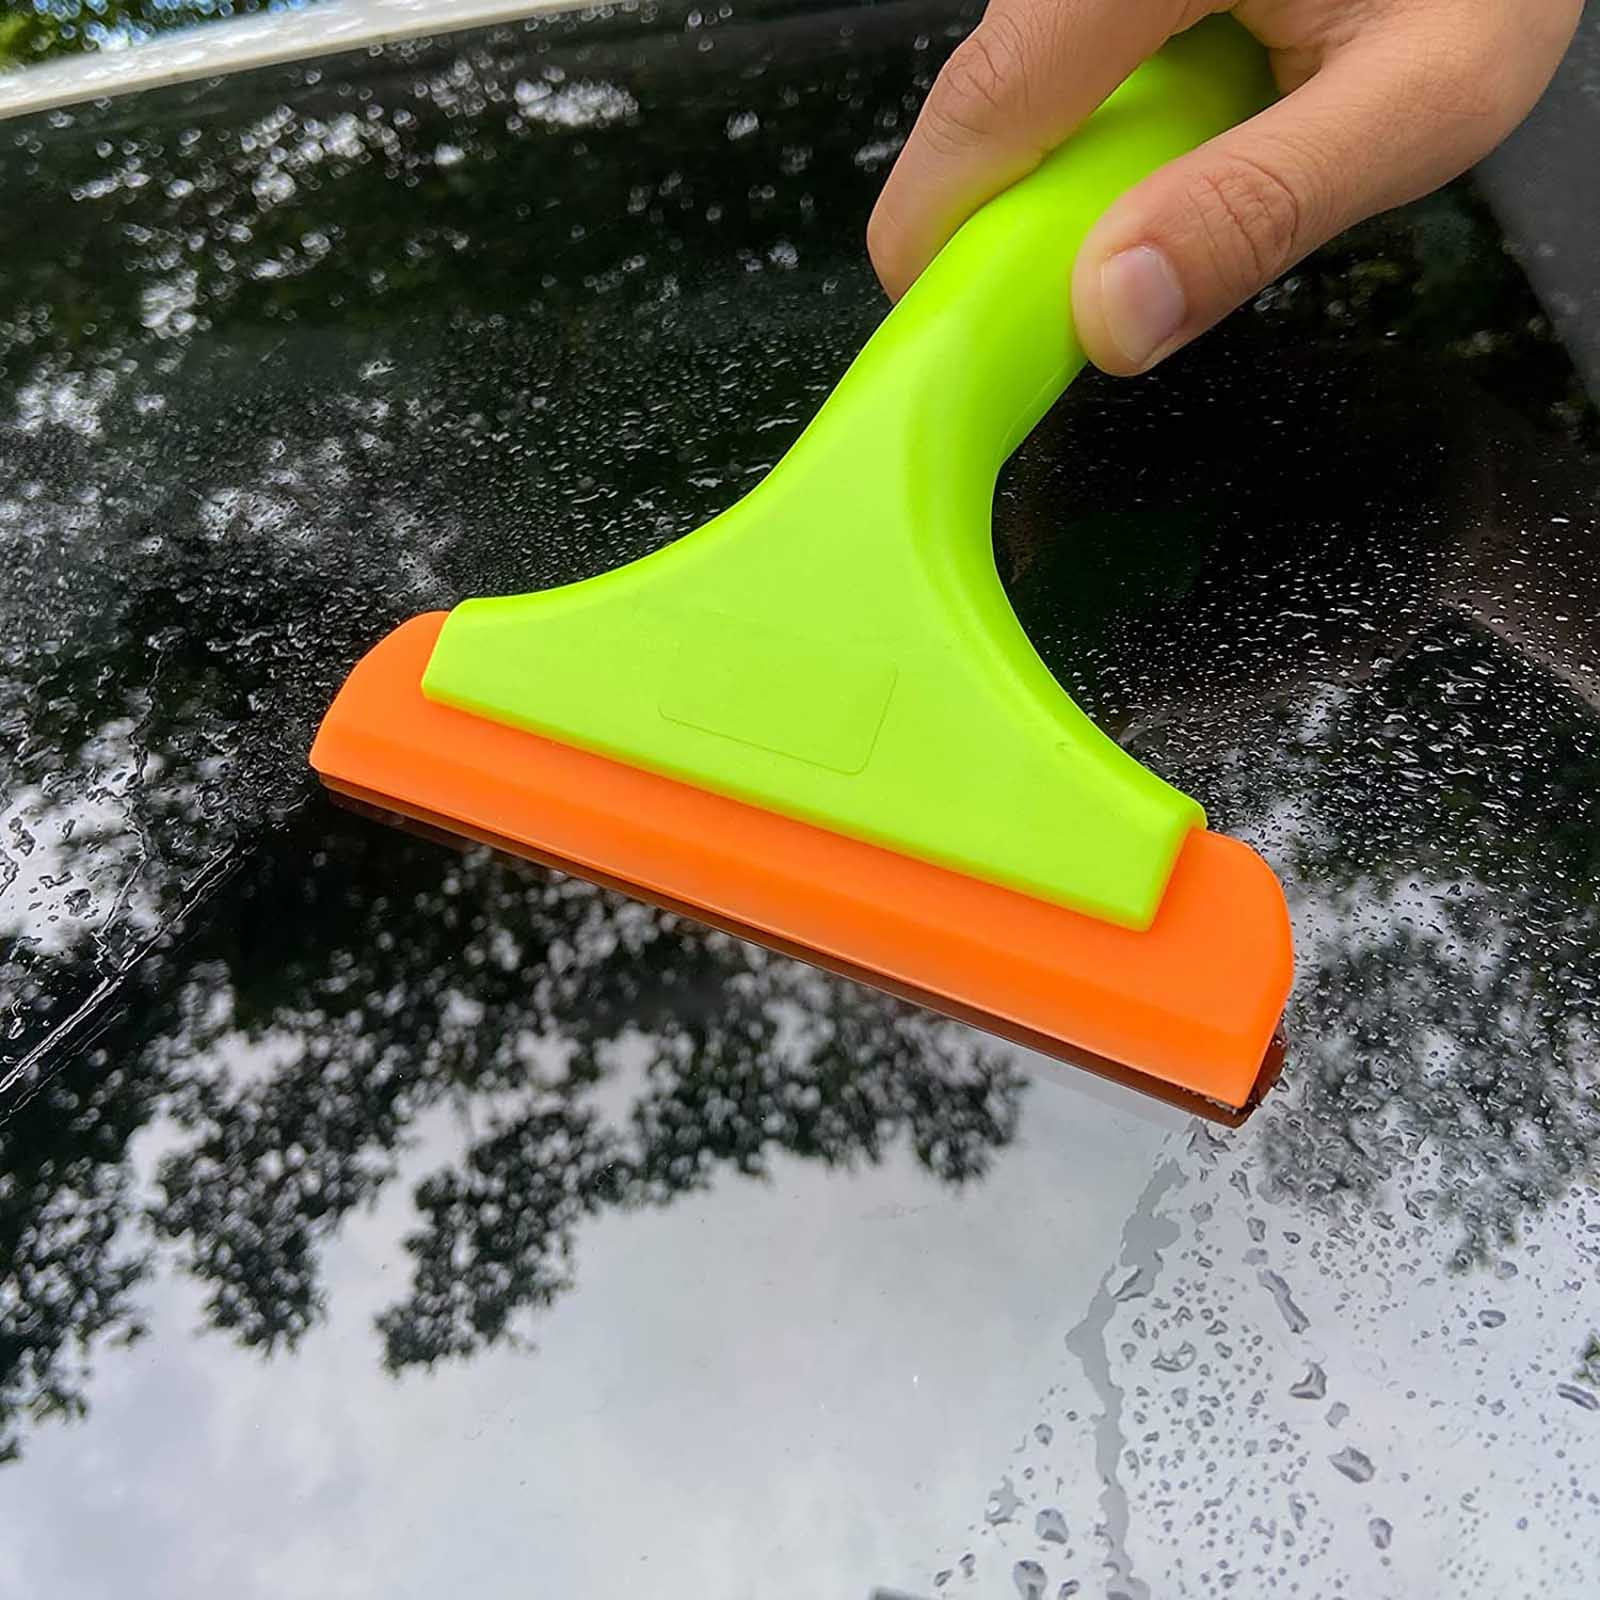  RICHMIRTH Silicone Rubber Blade Shower Squeegee 9 in